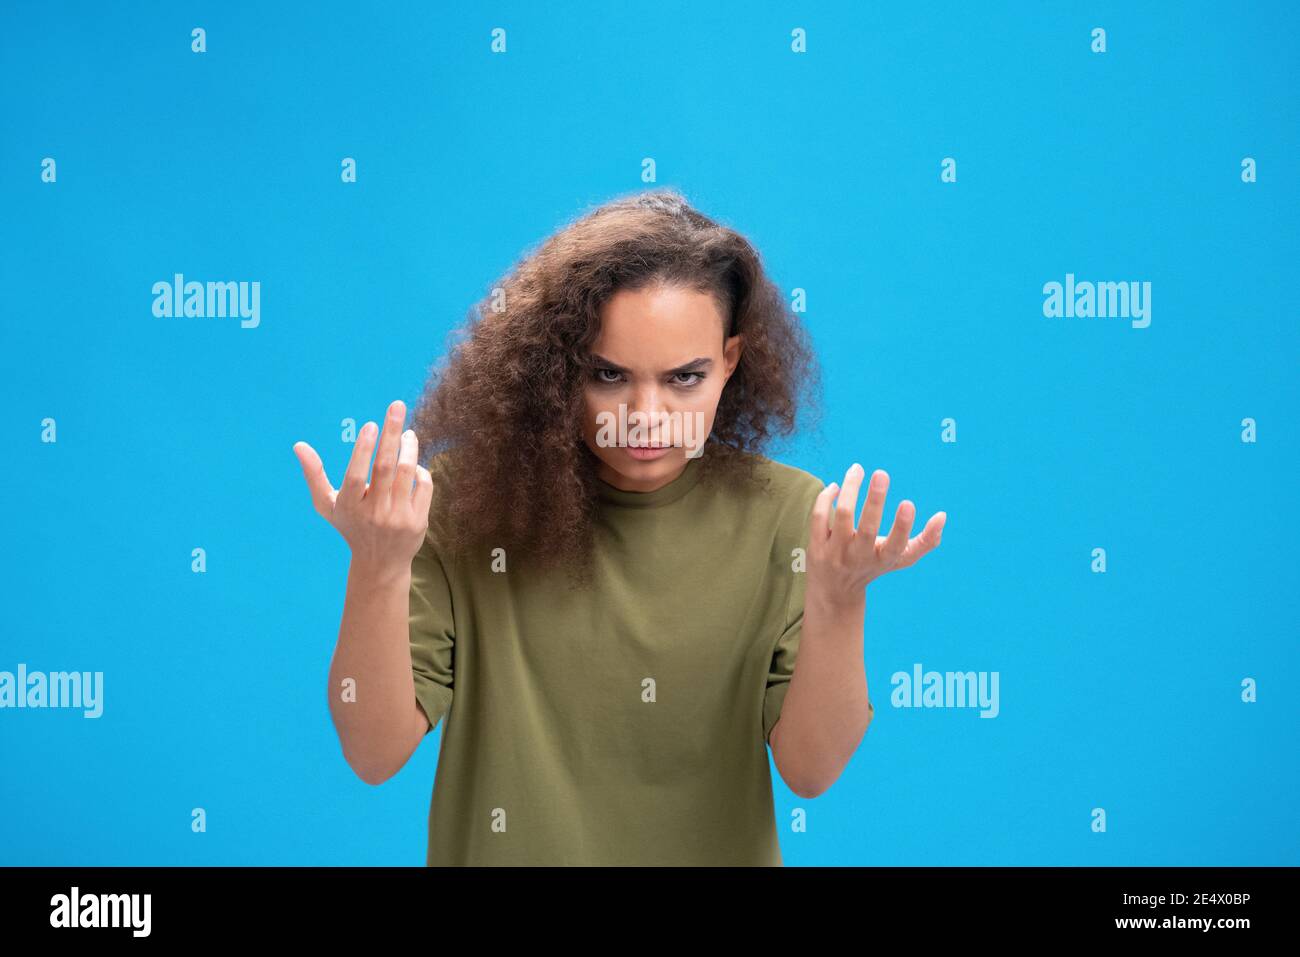 Unhappy african American millennial girl upset lifted hands up looking disappointedly at camera wearing olive t-shirt isolated on blue background Stock Photo